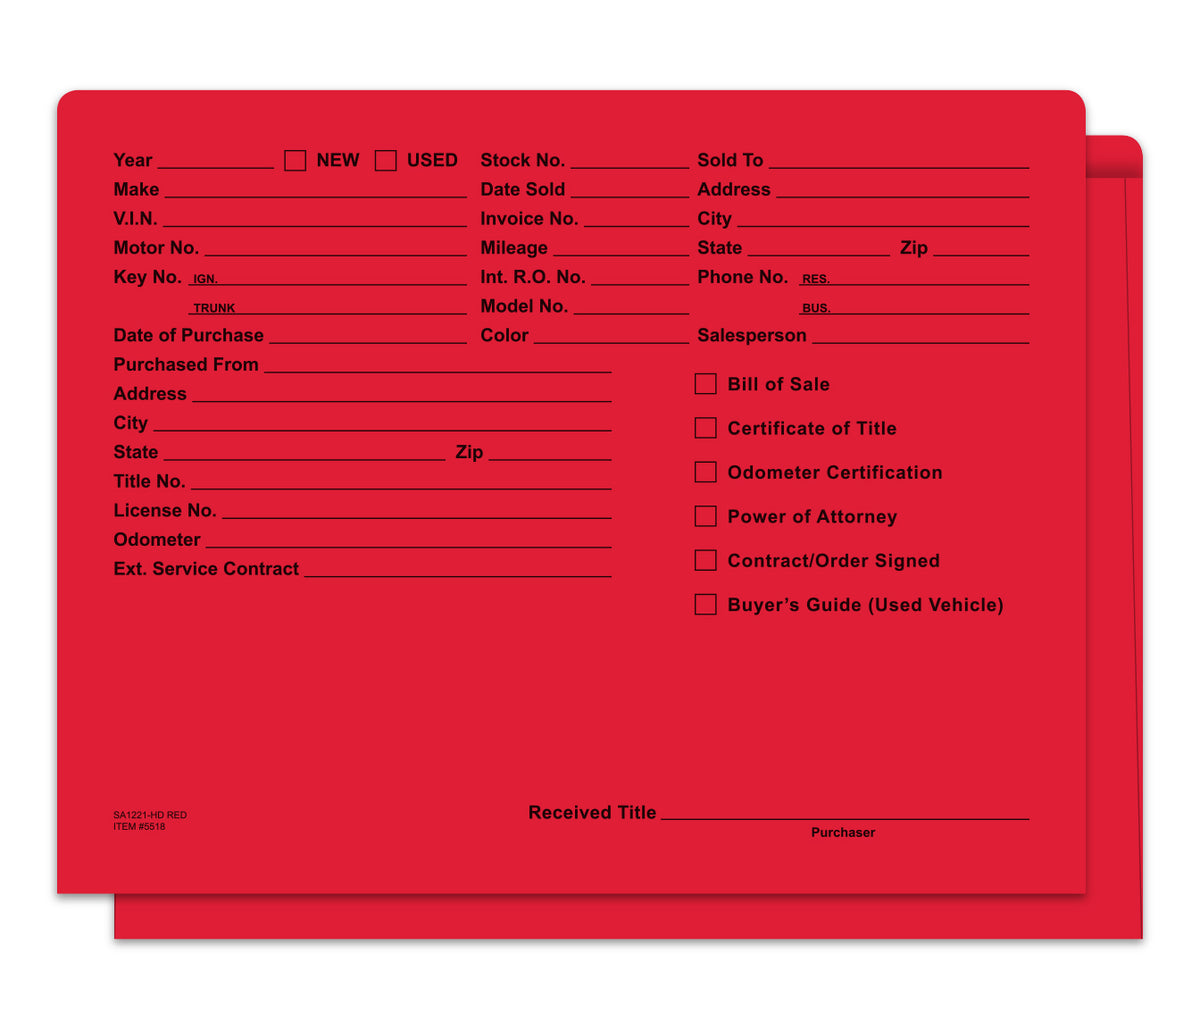 Heavy Duty Deal Envelope Printed in Red; image is a red colored deal envelope with black writing on it. www.flywheelnw.com